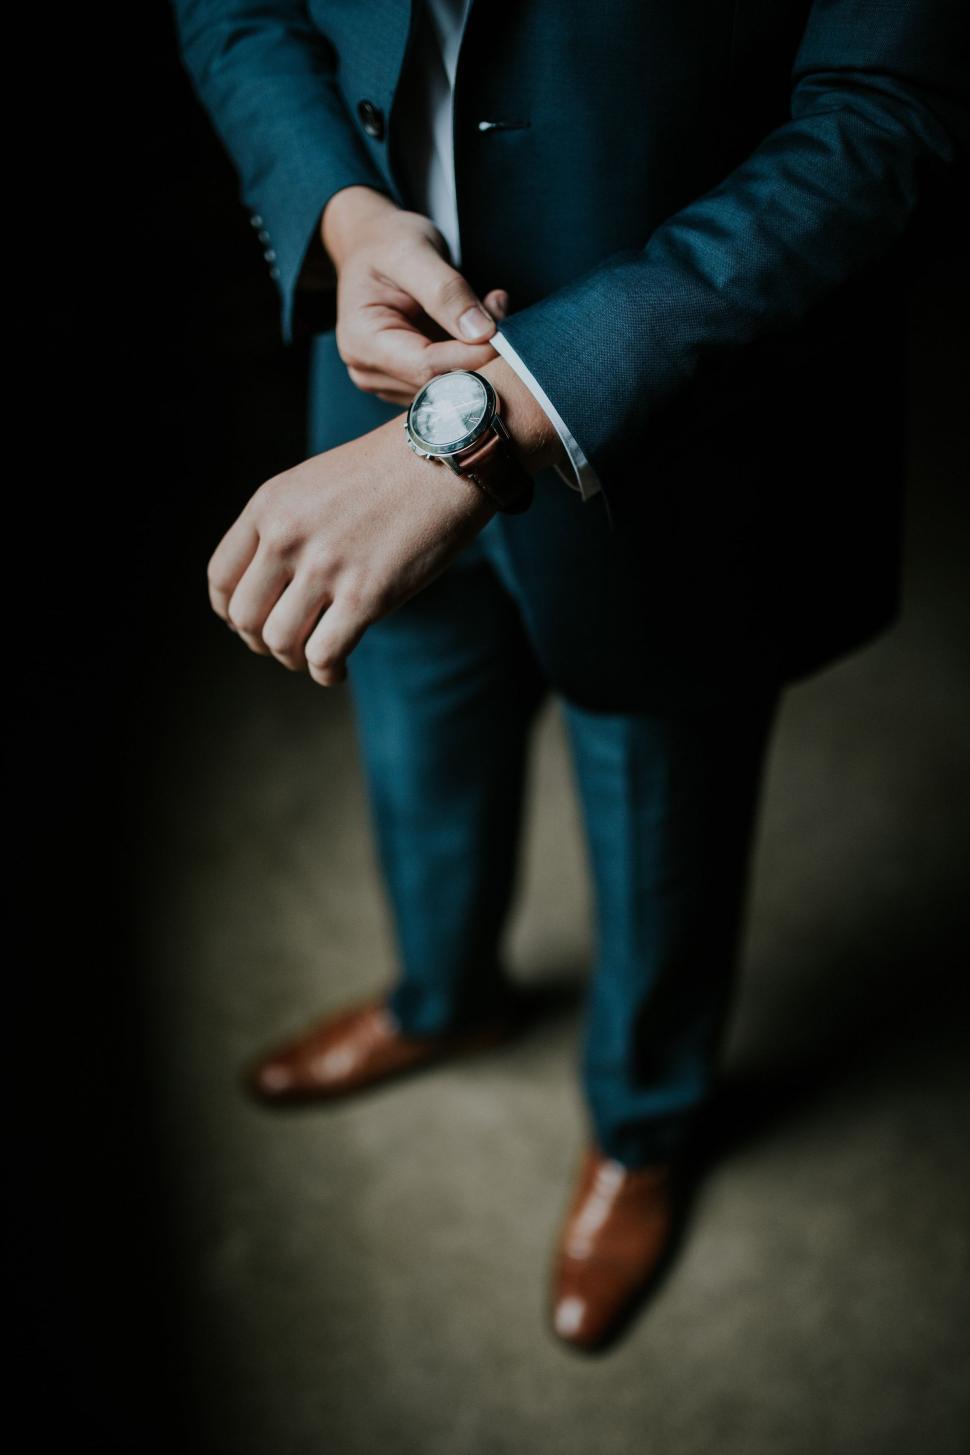 Free Image of Businessman in Suit and Tie Checking Watch 